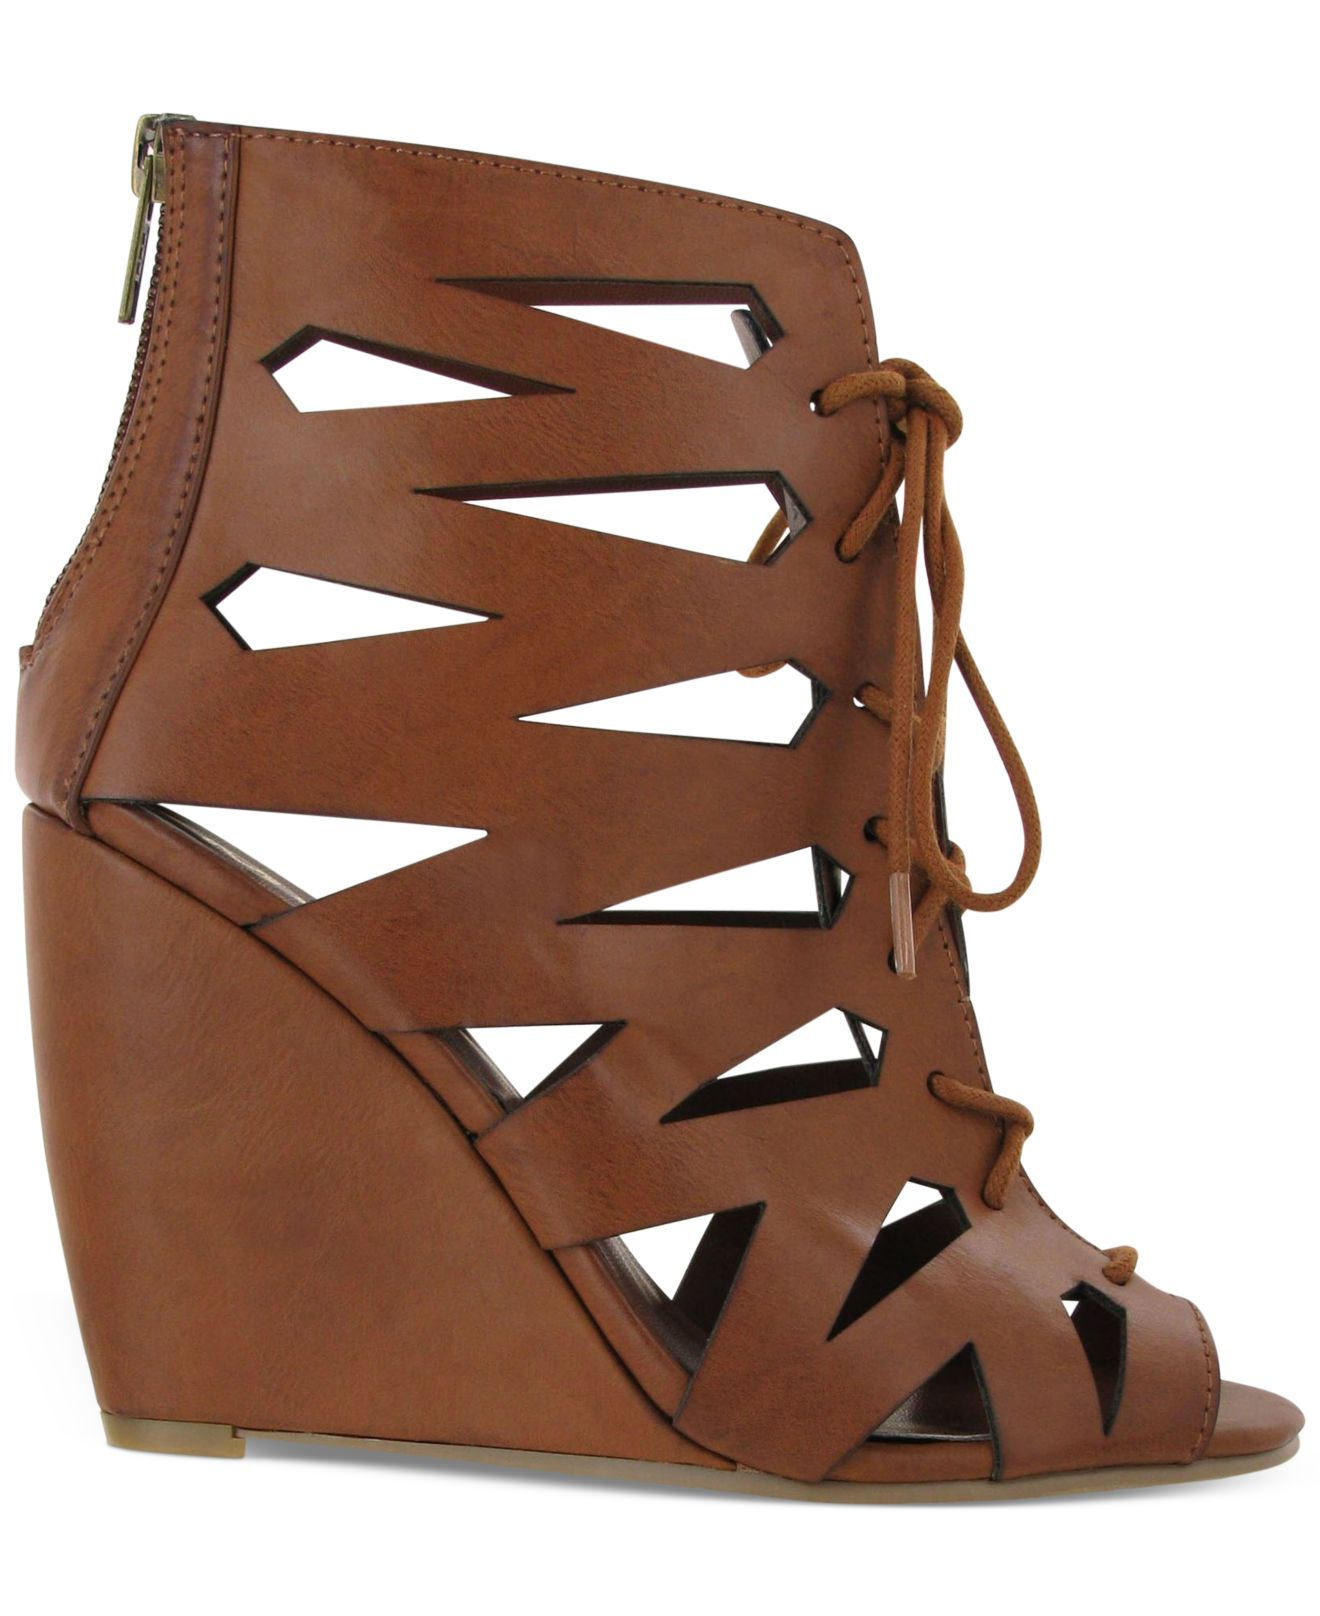 MIA Juna Caged Lace-Up Wedge Sandals in Cognac (Brown) - Lyst